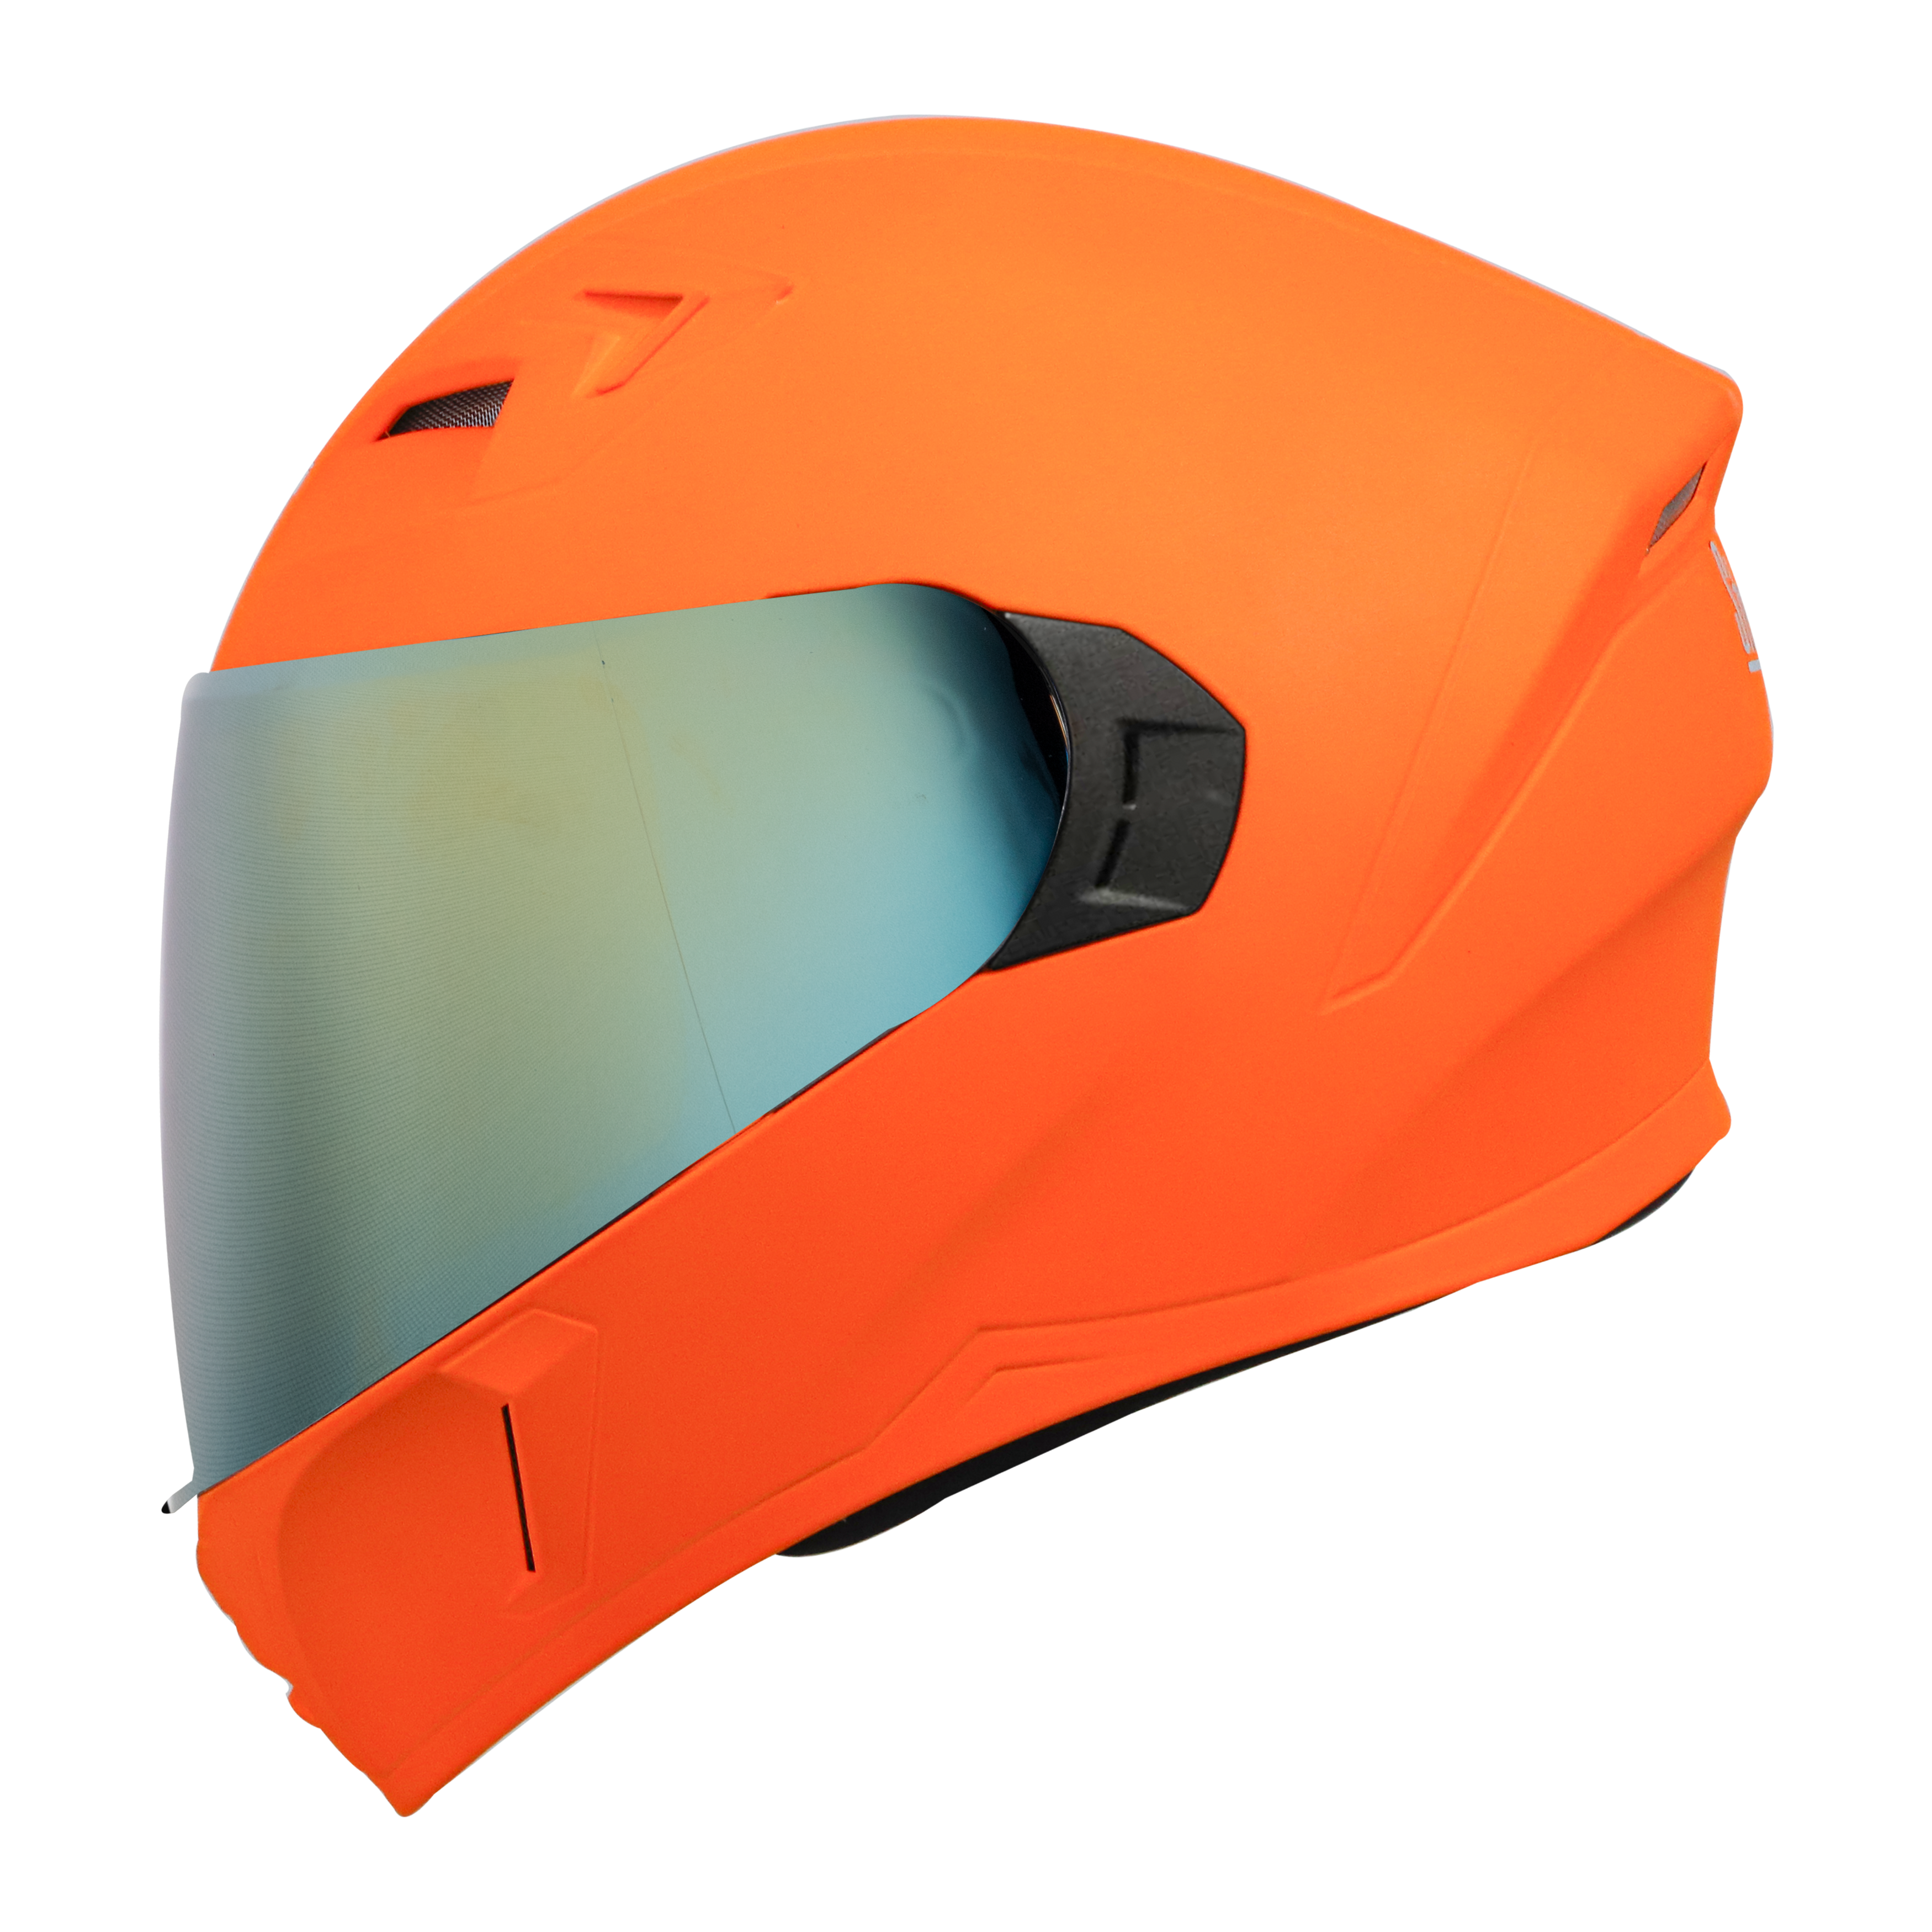 SBA-21 VFX GLOSSY FLUO ORANGE ( FITTED WITH CLEAR VISOR EXTRA CHROME GOLD VISOR FREE)